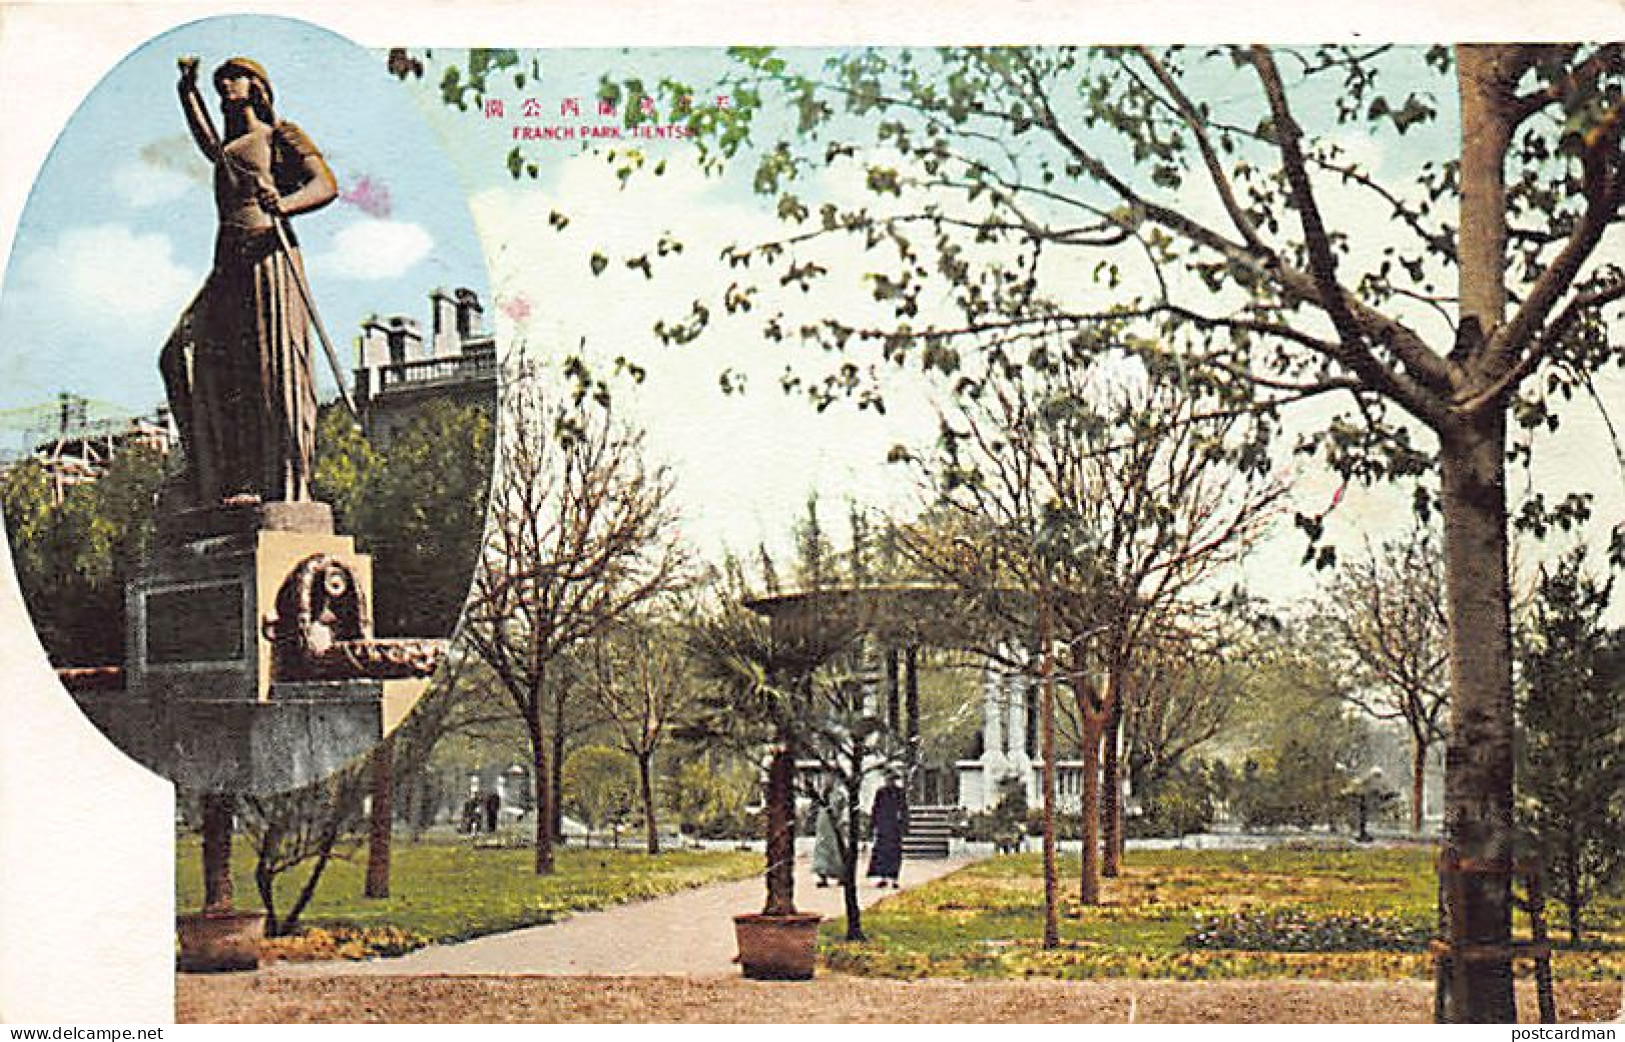 China - TIANJIN Tientsin - French Park - Publ. Unknown  - Chine